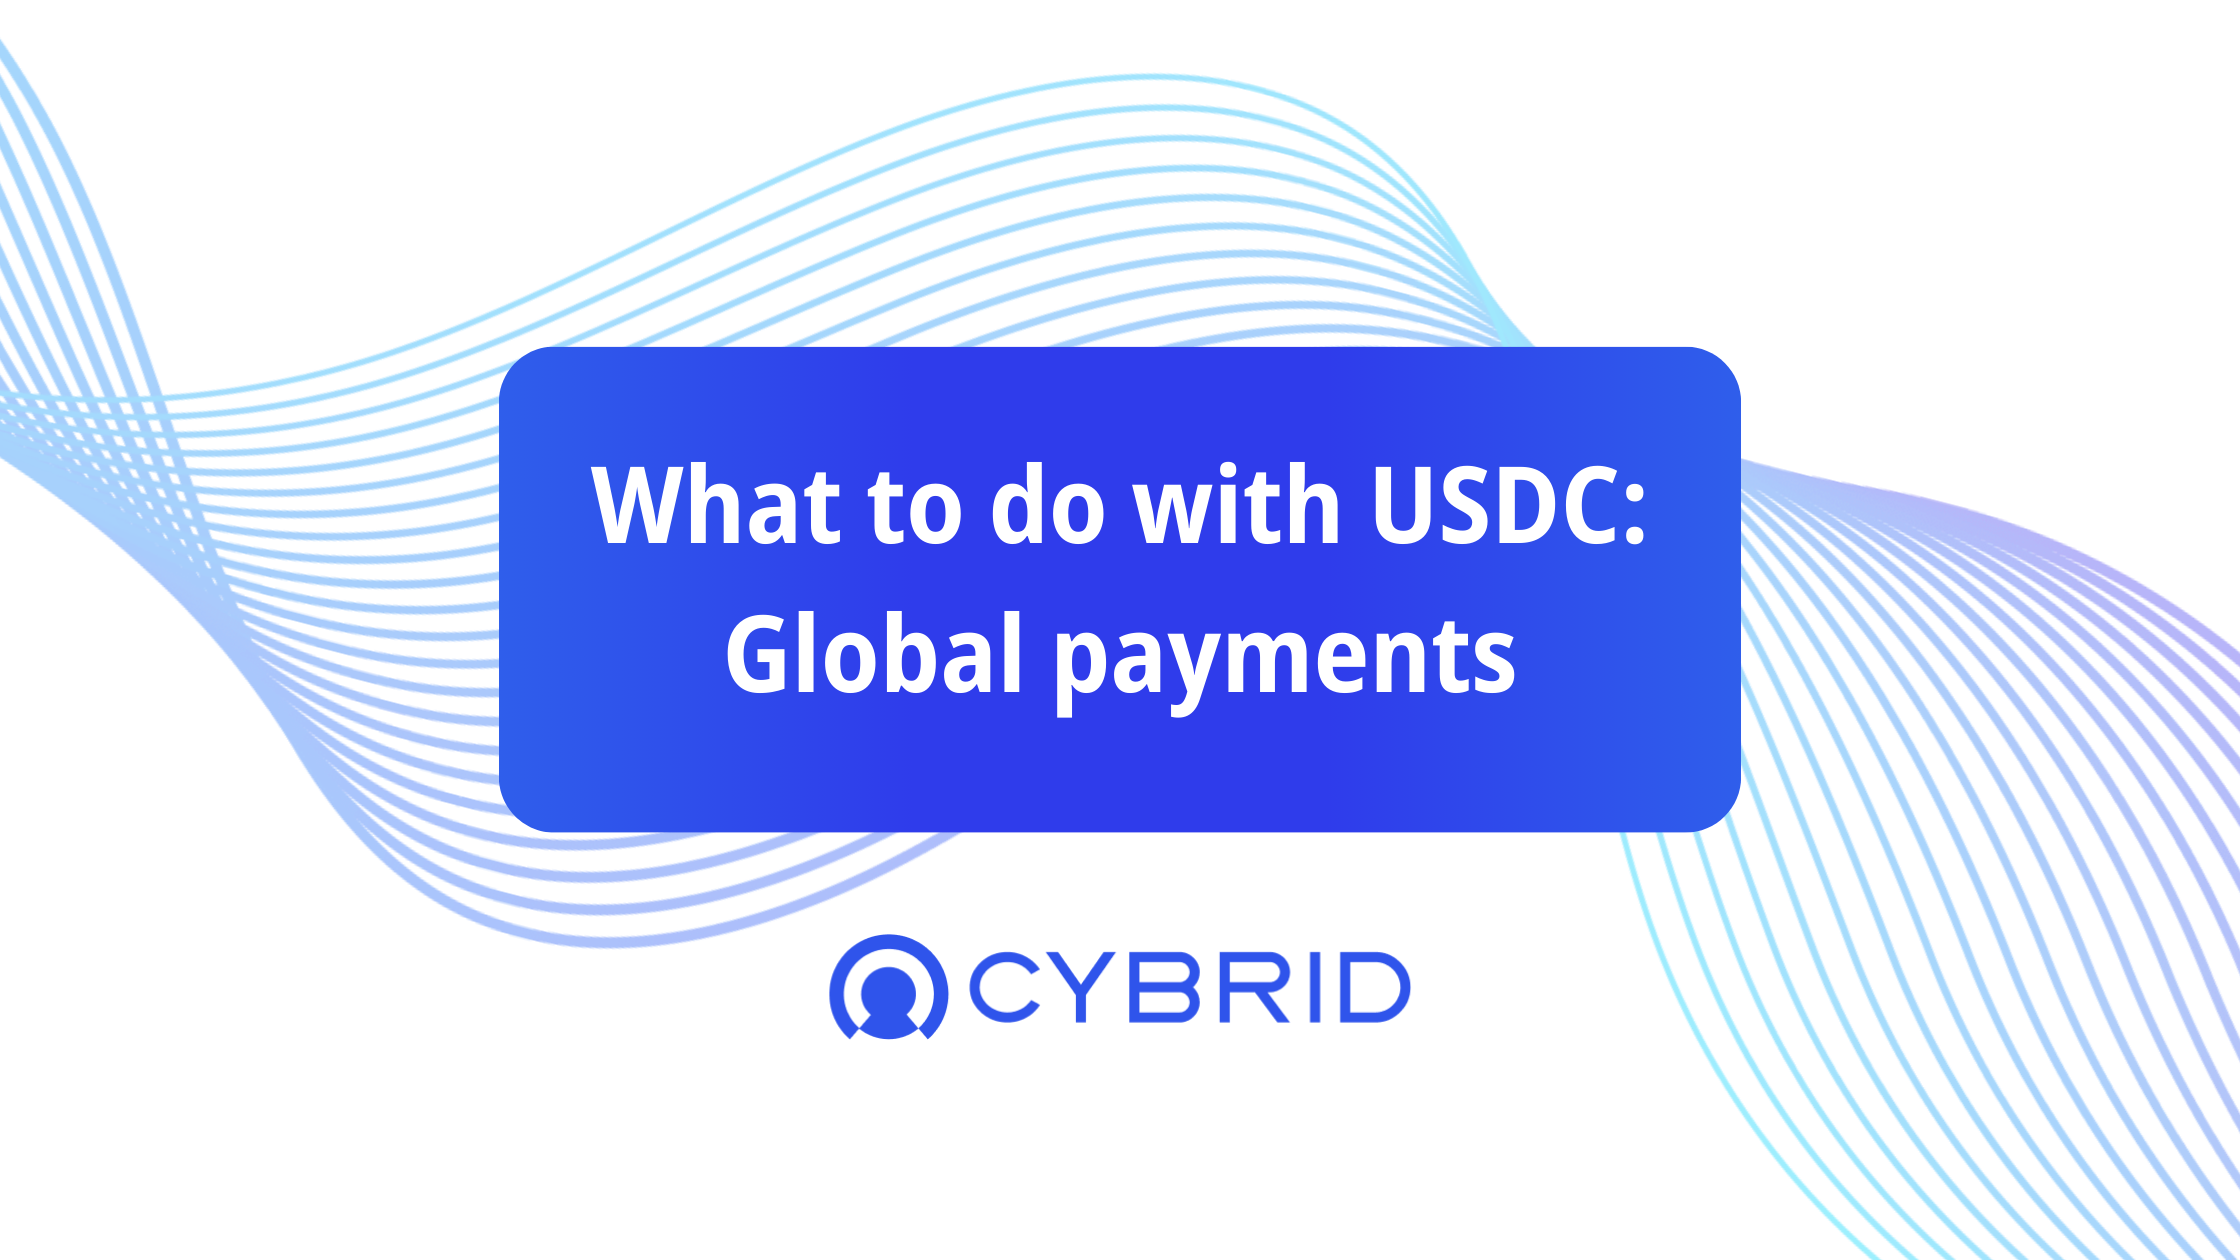 What can you do with USDC? Simple, Global Payments!